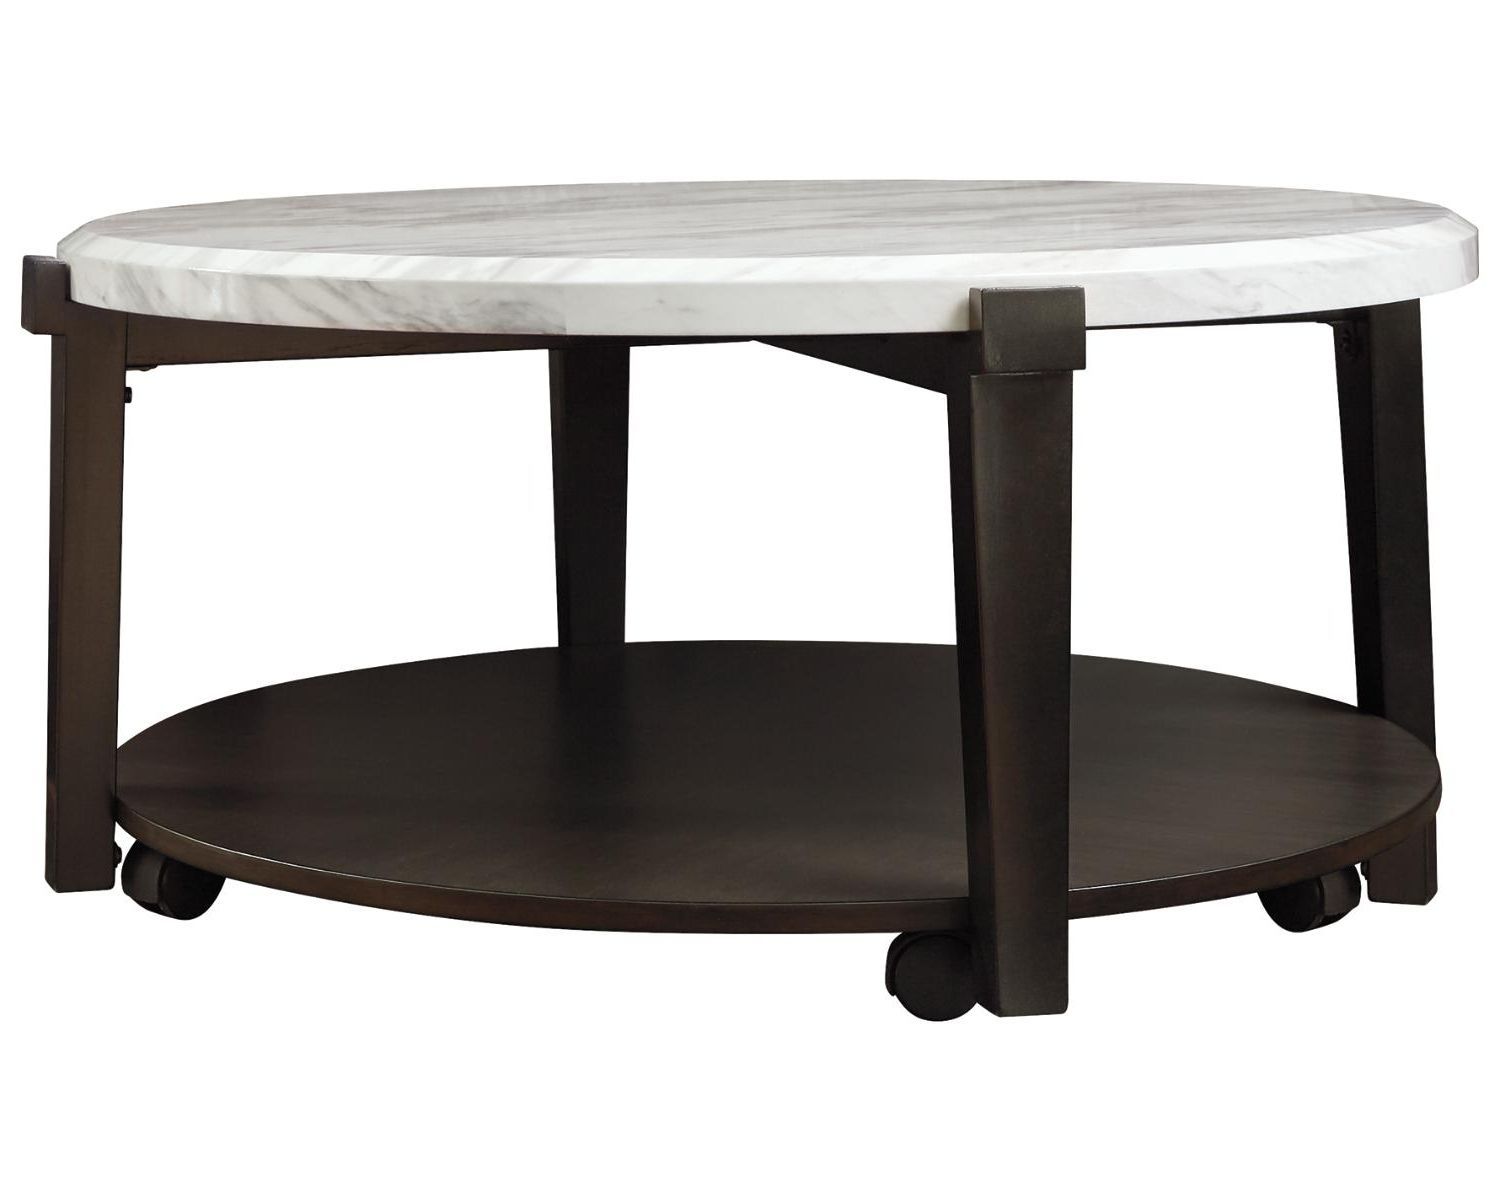 Faux White Marble And Metal Coffee Tables Inside Preferred Signature Designashley Janilly Dark Brown Round (View 10 of 20)